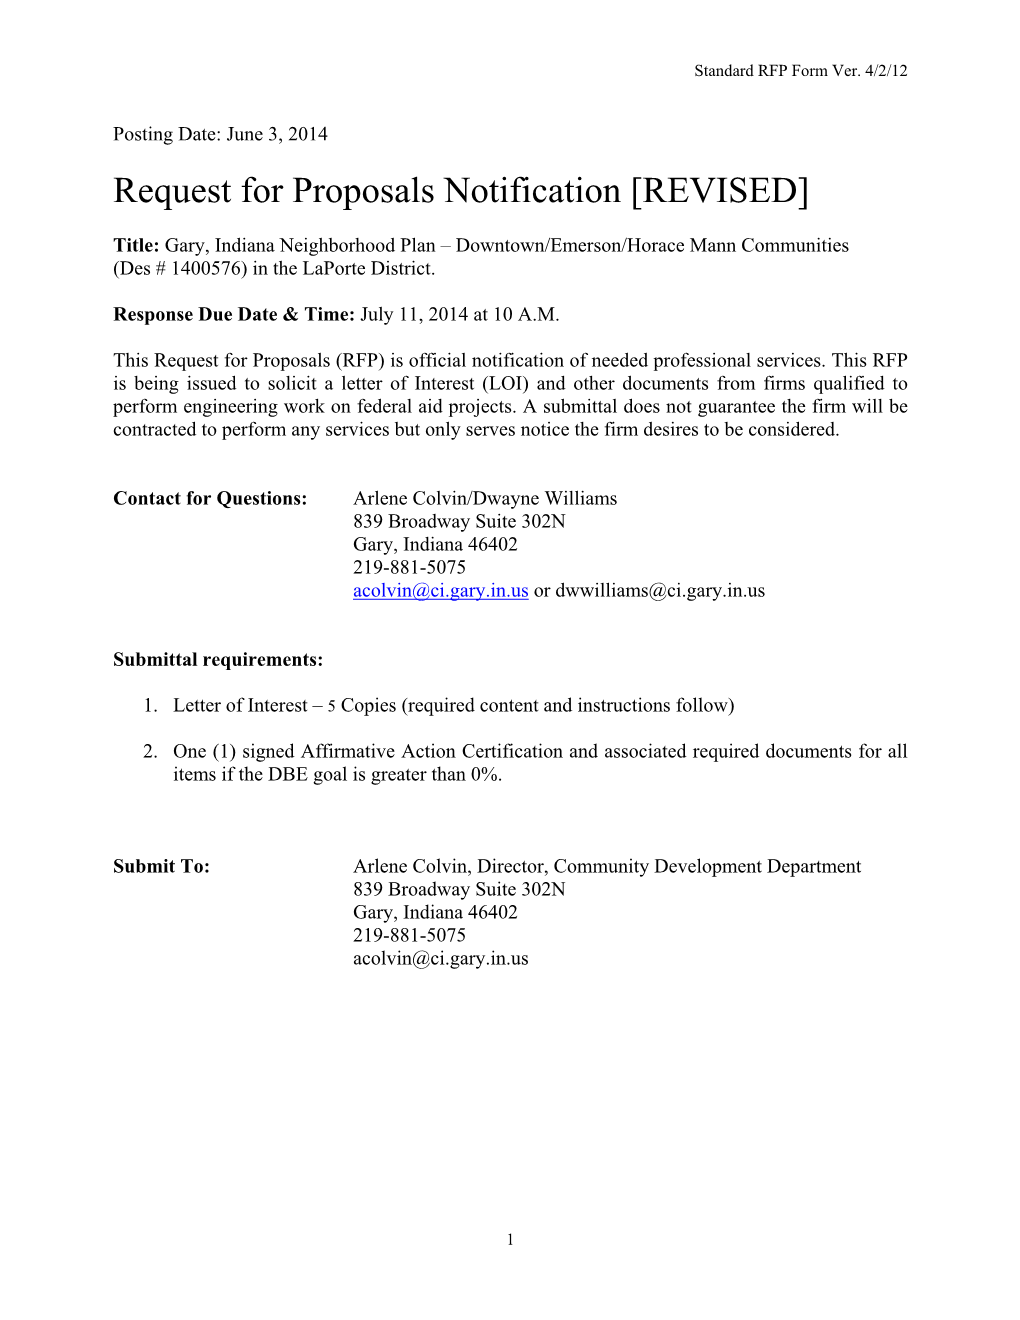 Request for Proposals Notification [REVISED]